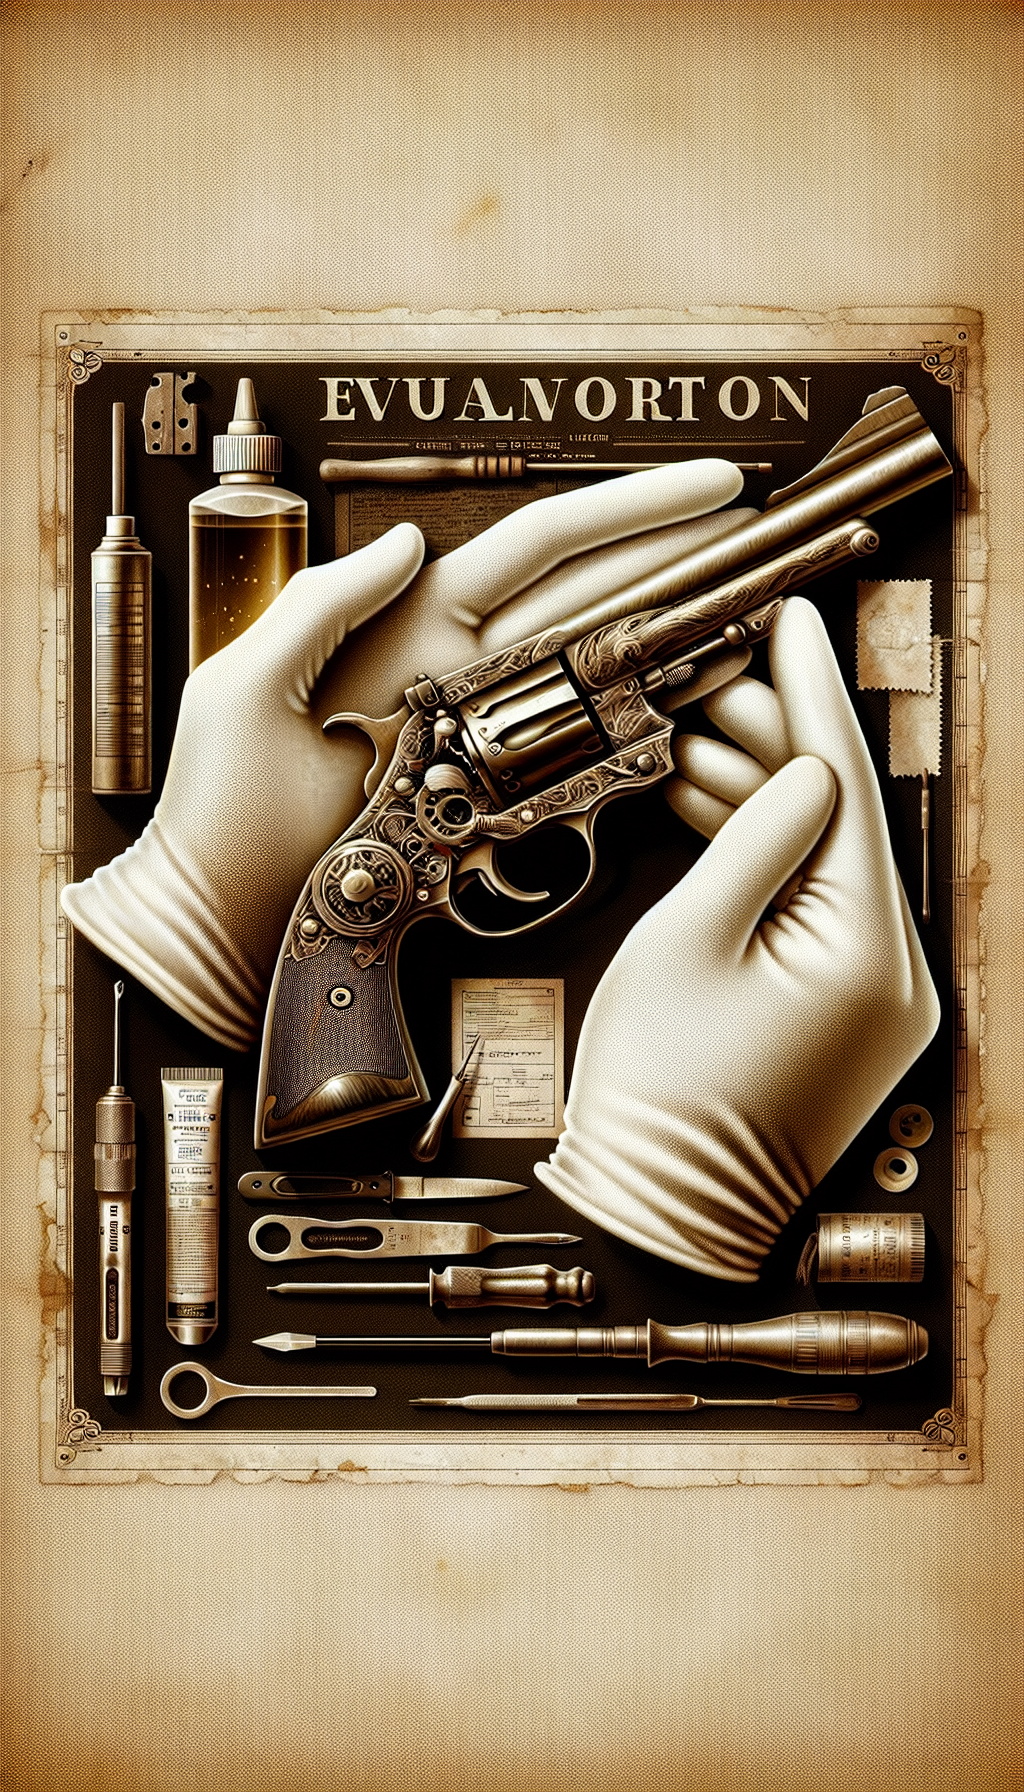 An illustration portrays a pair of hands in white gloves delicately holding an antique revolver against a background of faded appraisal documents, with transparent overlays of maintenance tools such as oil, a soft cloth, and a screwdriver. The juxtaposition of preservation and appraisal is symbolized by a shimmering price tag attached to the gun's handle, blending sepia tones with metallic accents.